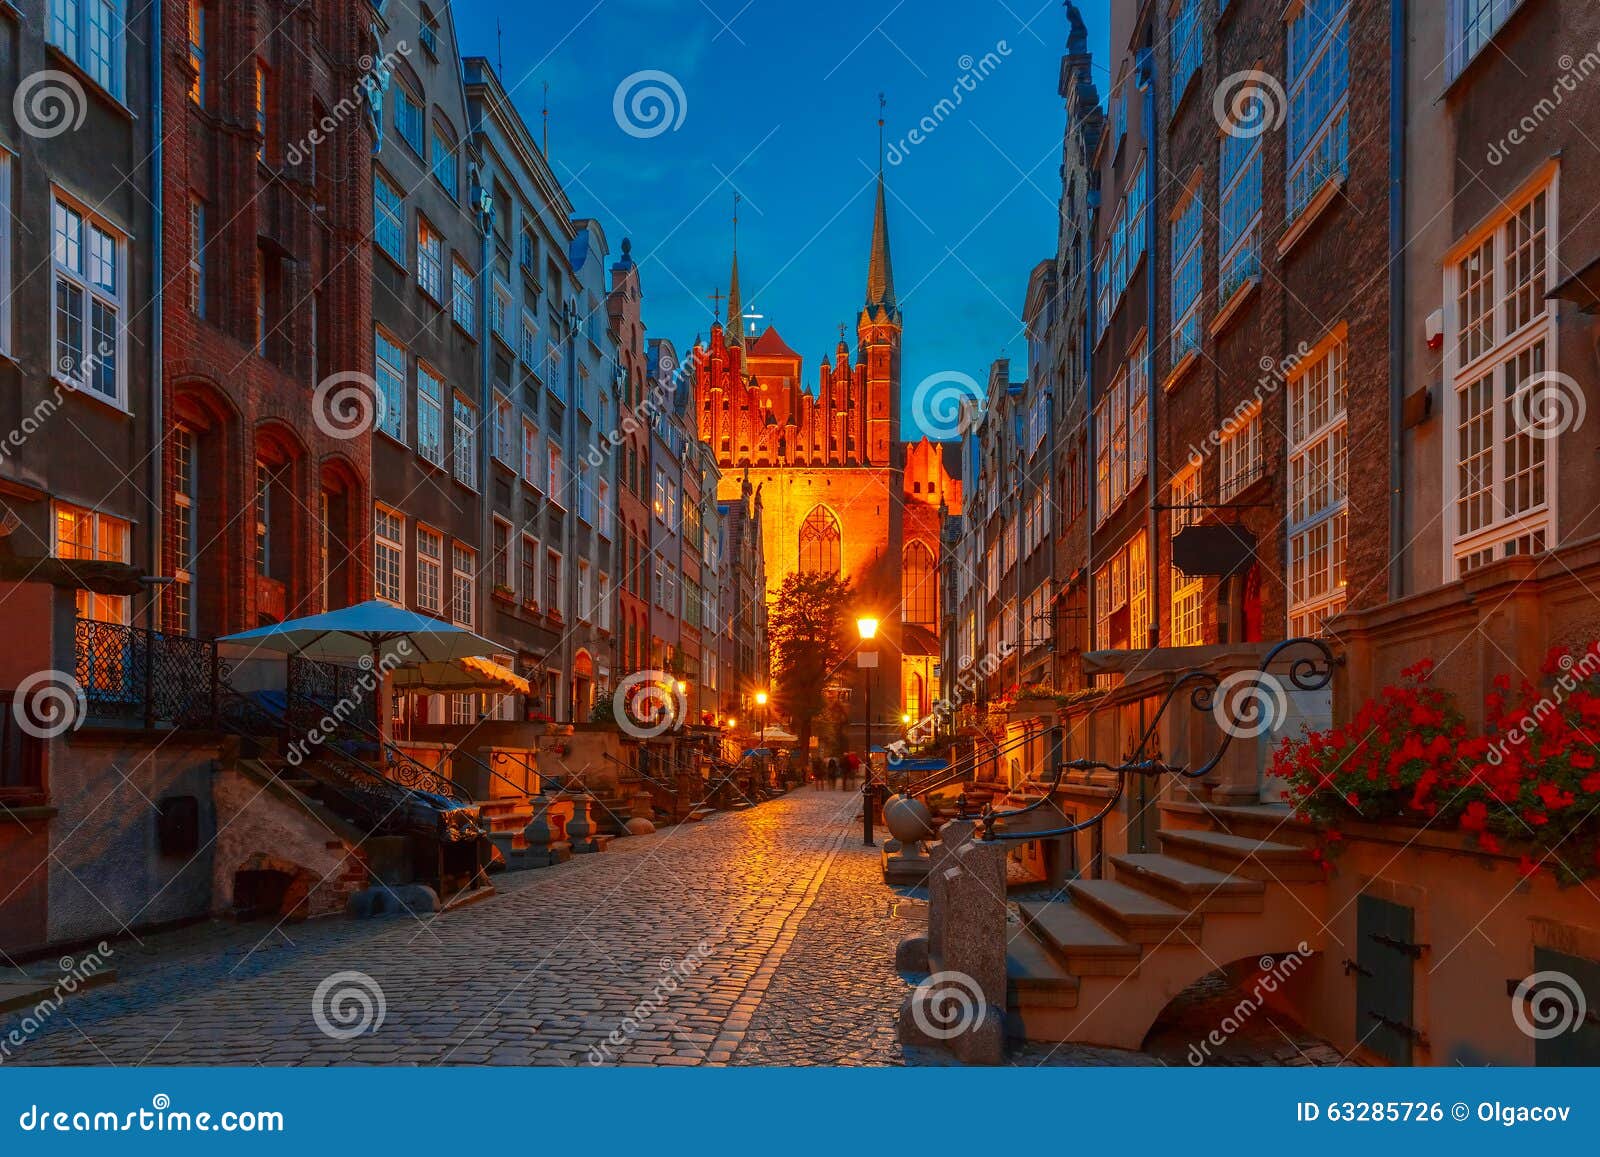 mariacka street in gdansk old town, poland